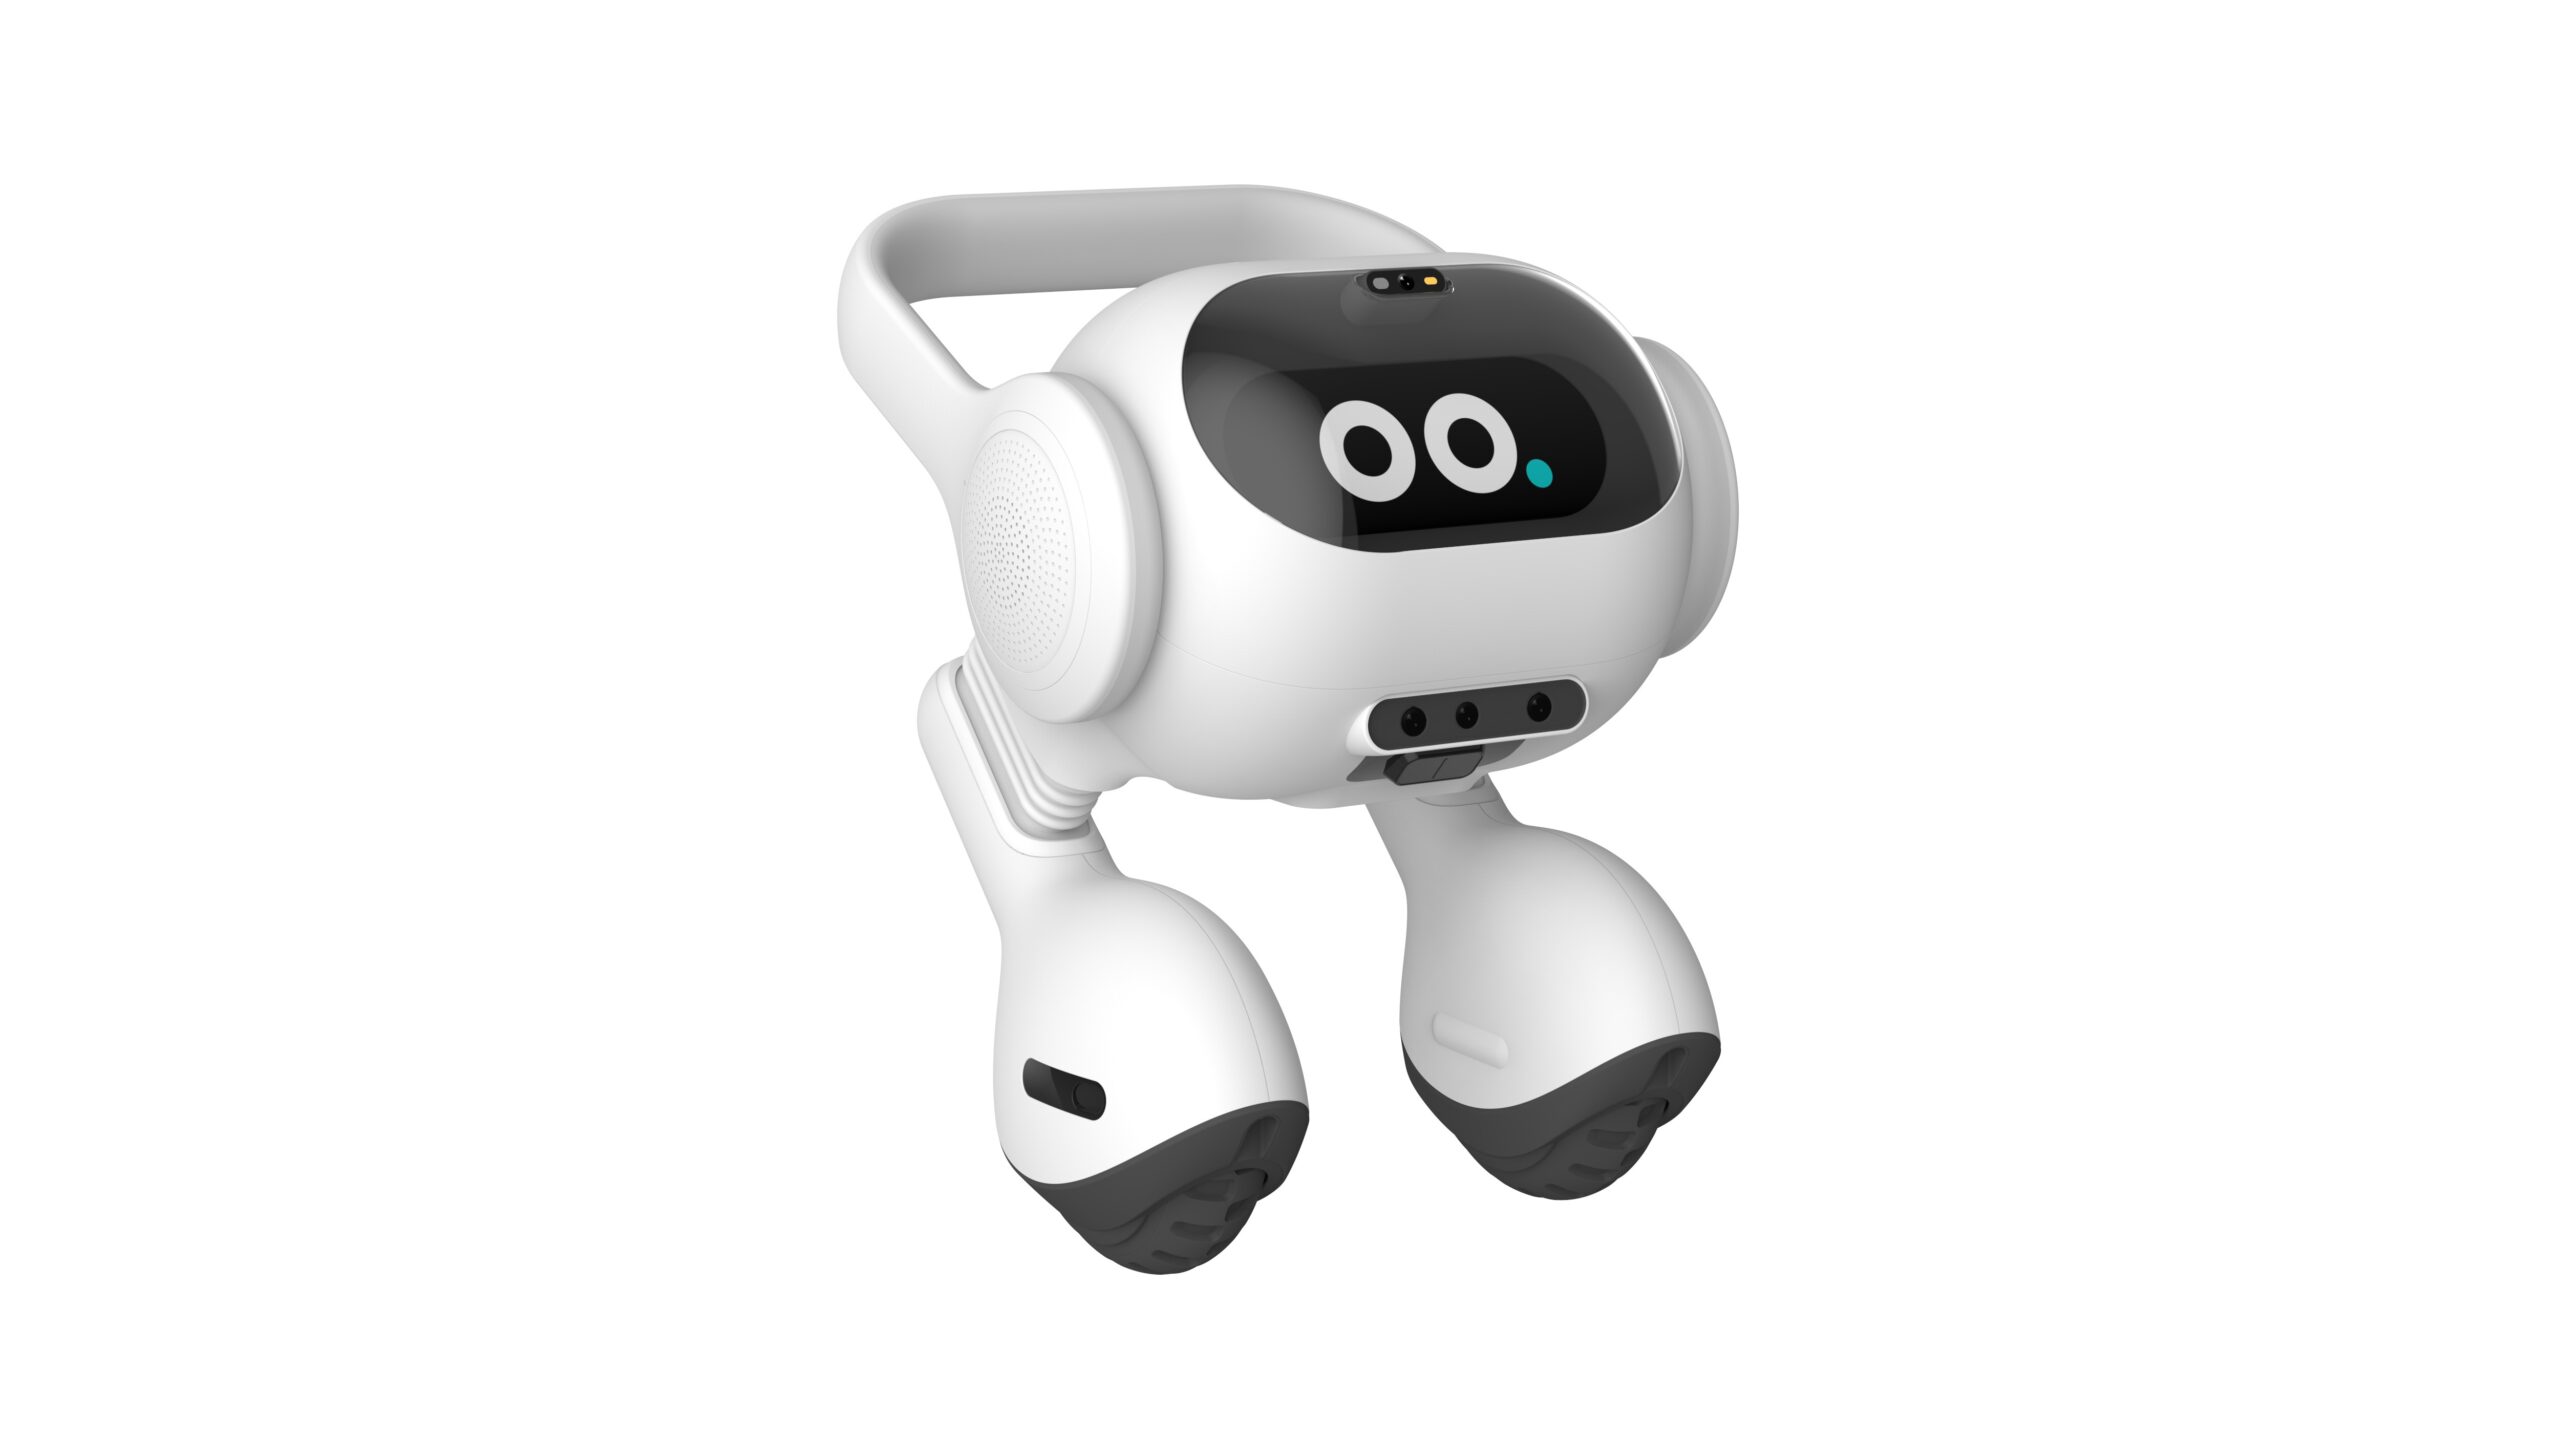 LG AI Agent robot, which is a small white robot with two legs and a face with big round eyes